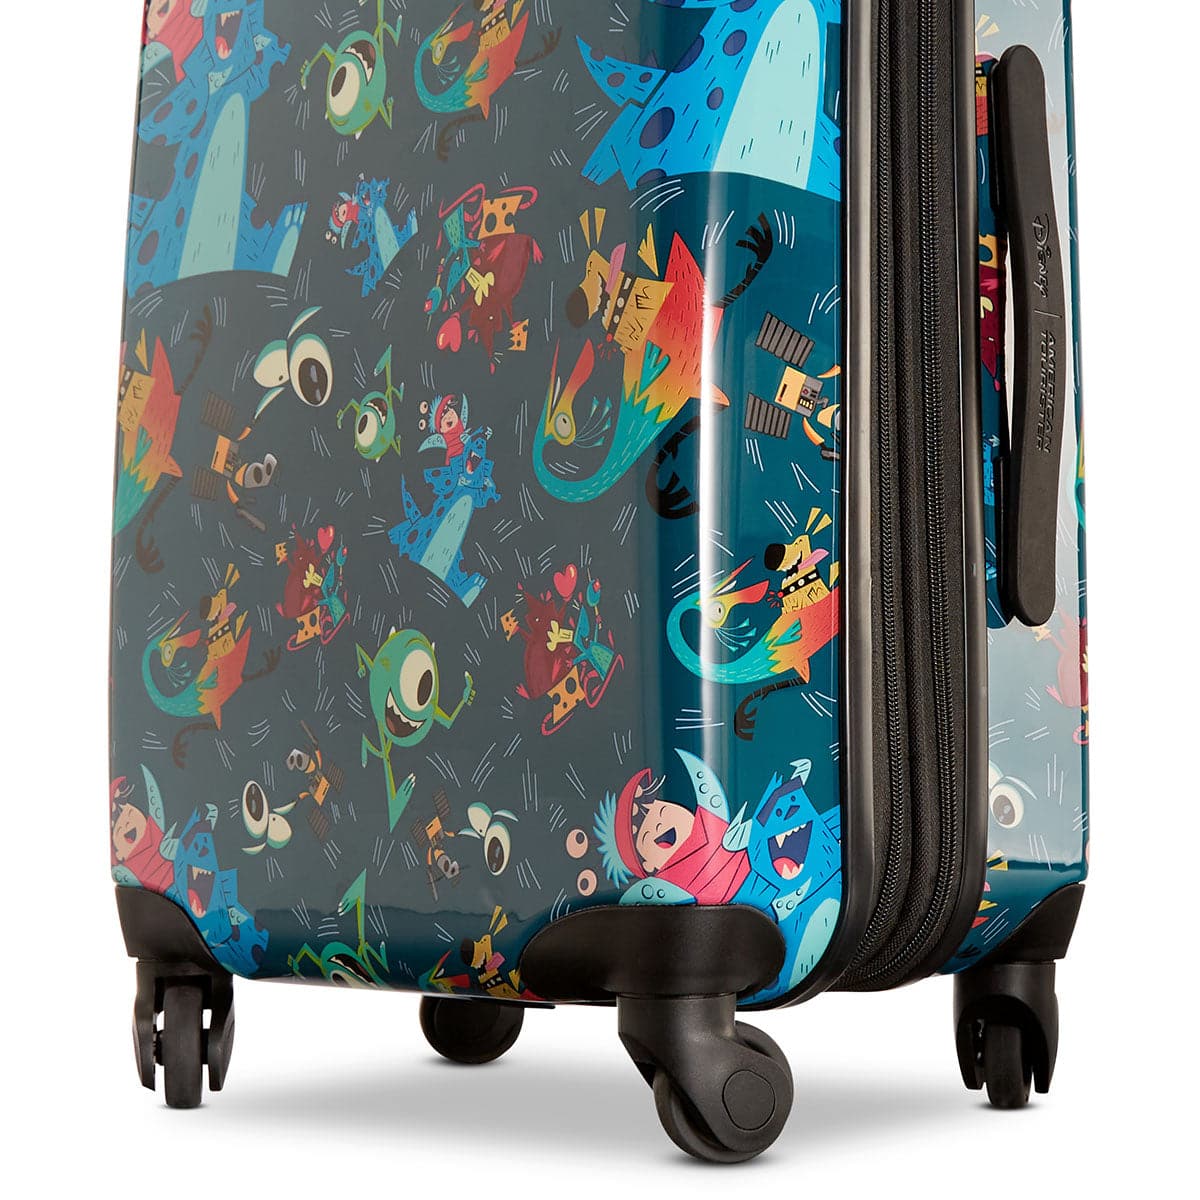 American Tourister Hardside Spinner Carry-On Luggage